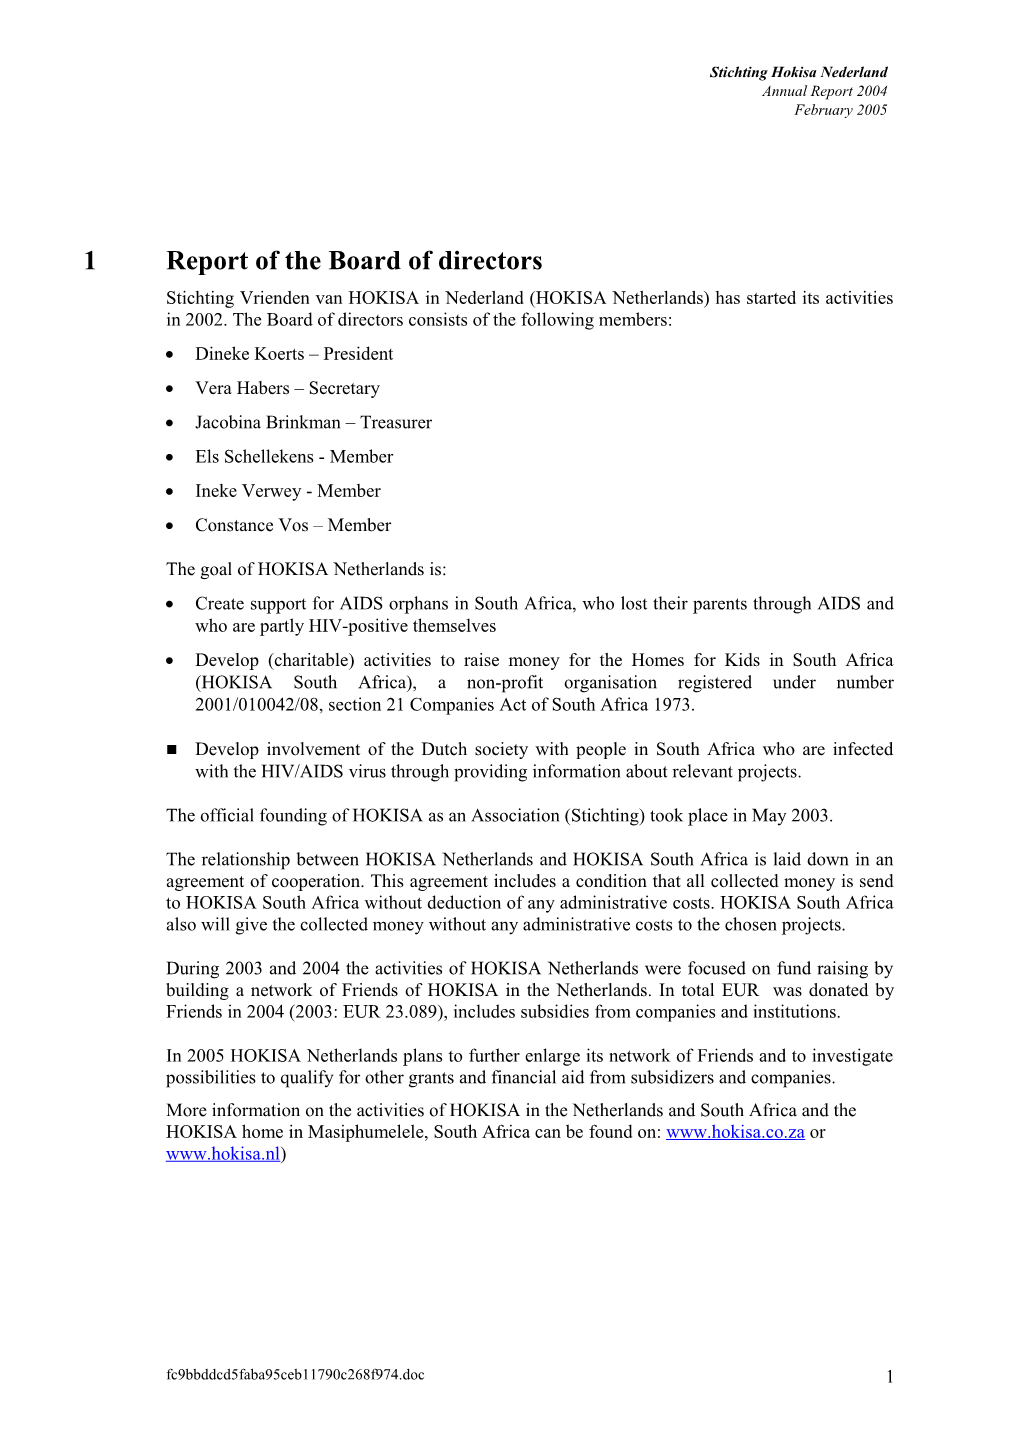 1 Report of the Board of Directors 1